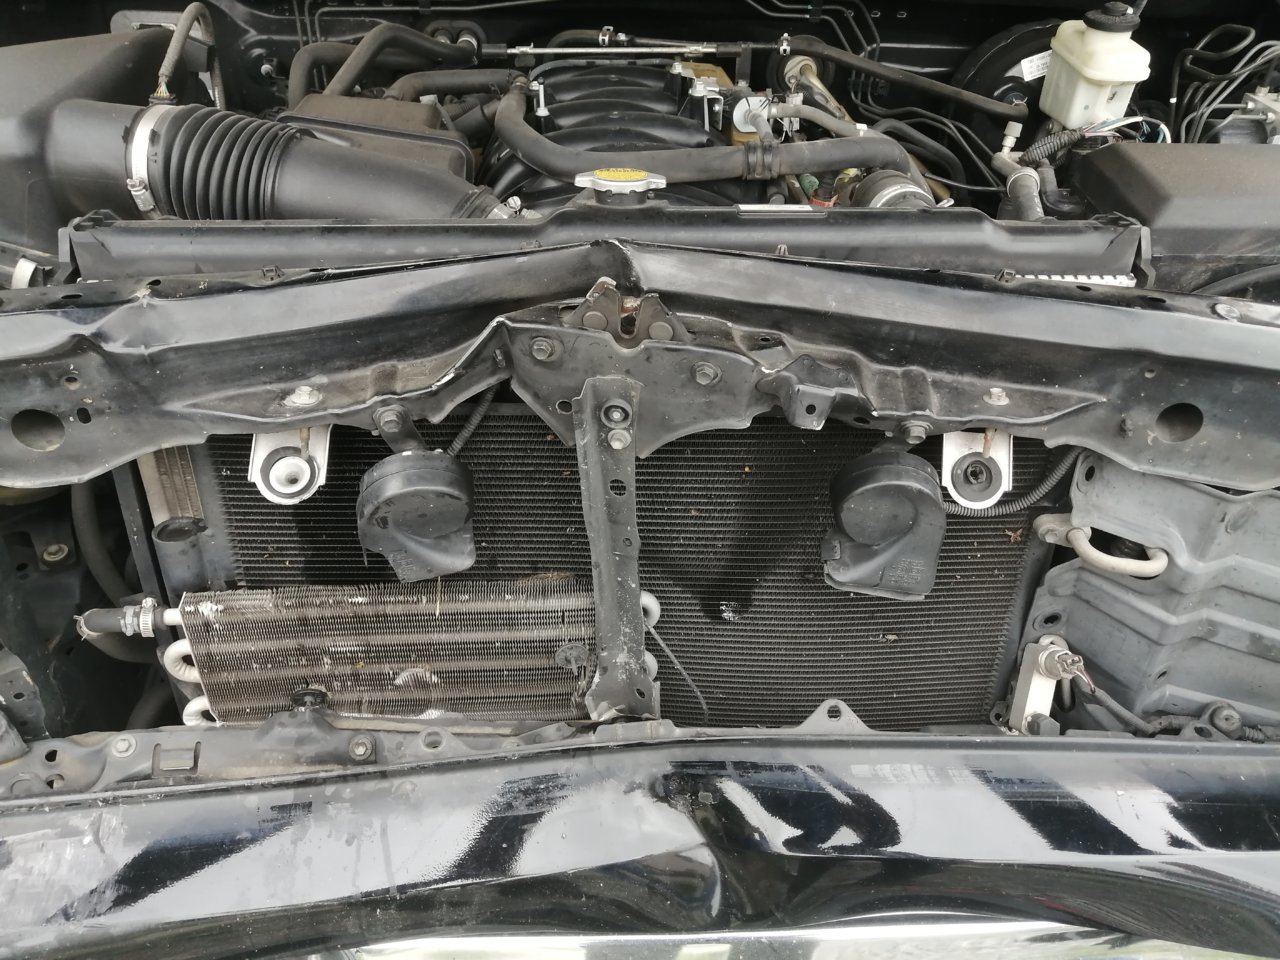 radiaotor support damaged including radioator and oil cooler  and AC Lines.jpg